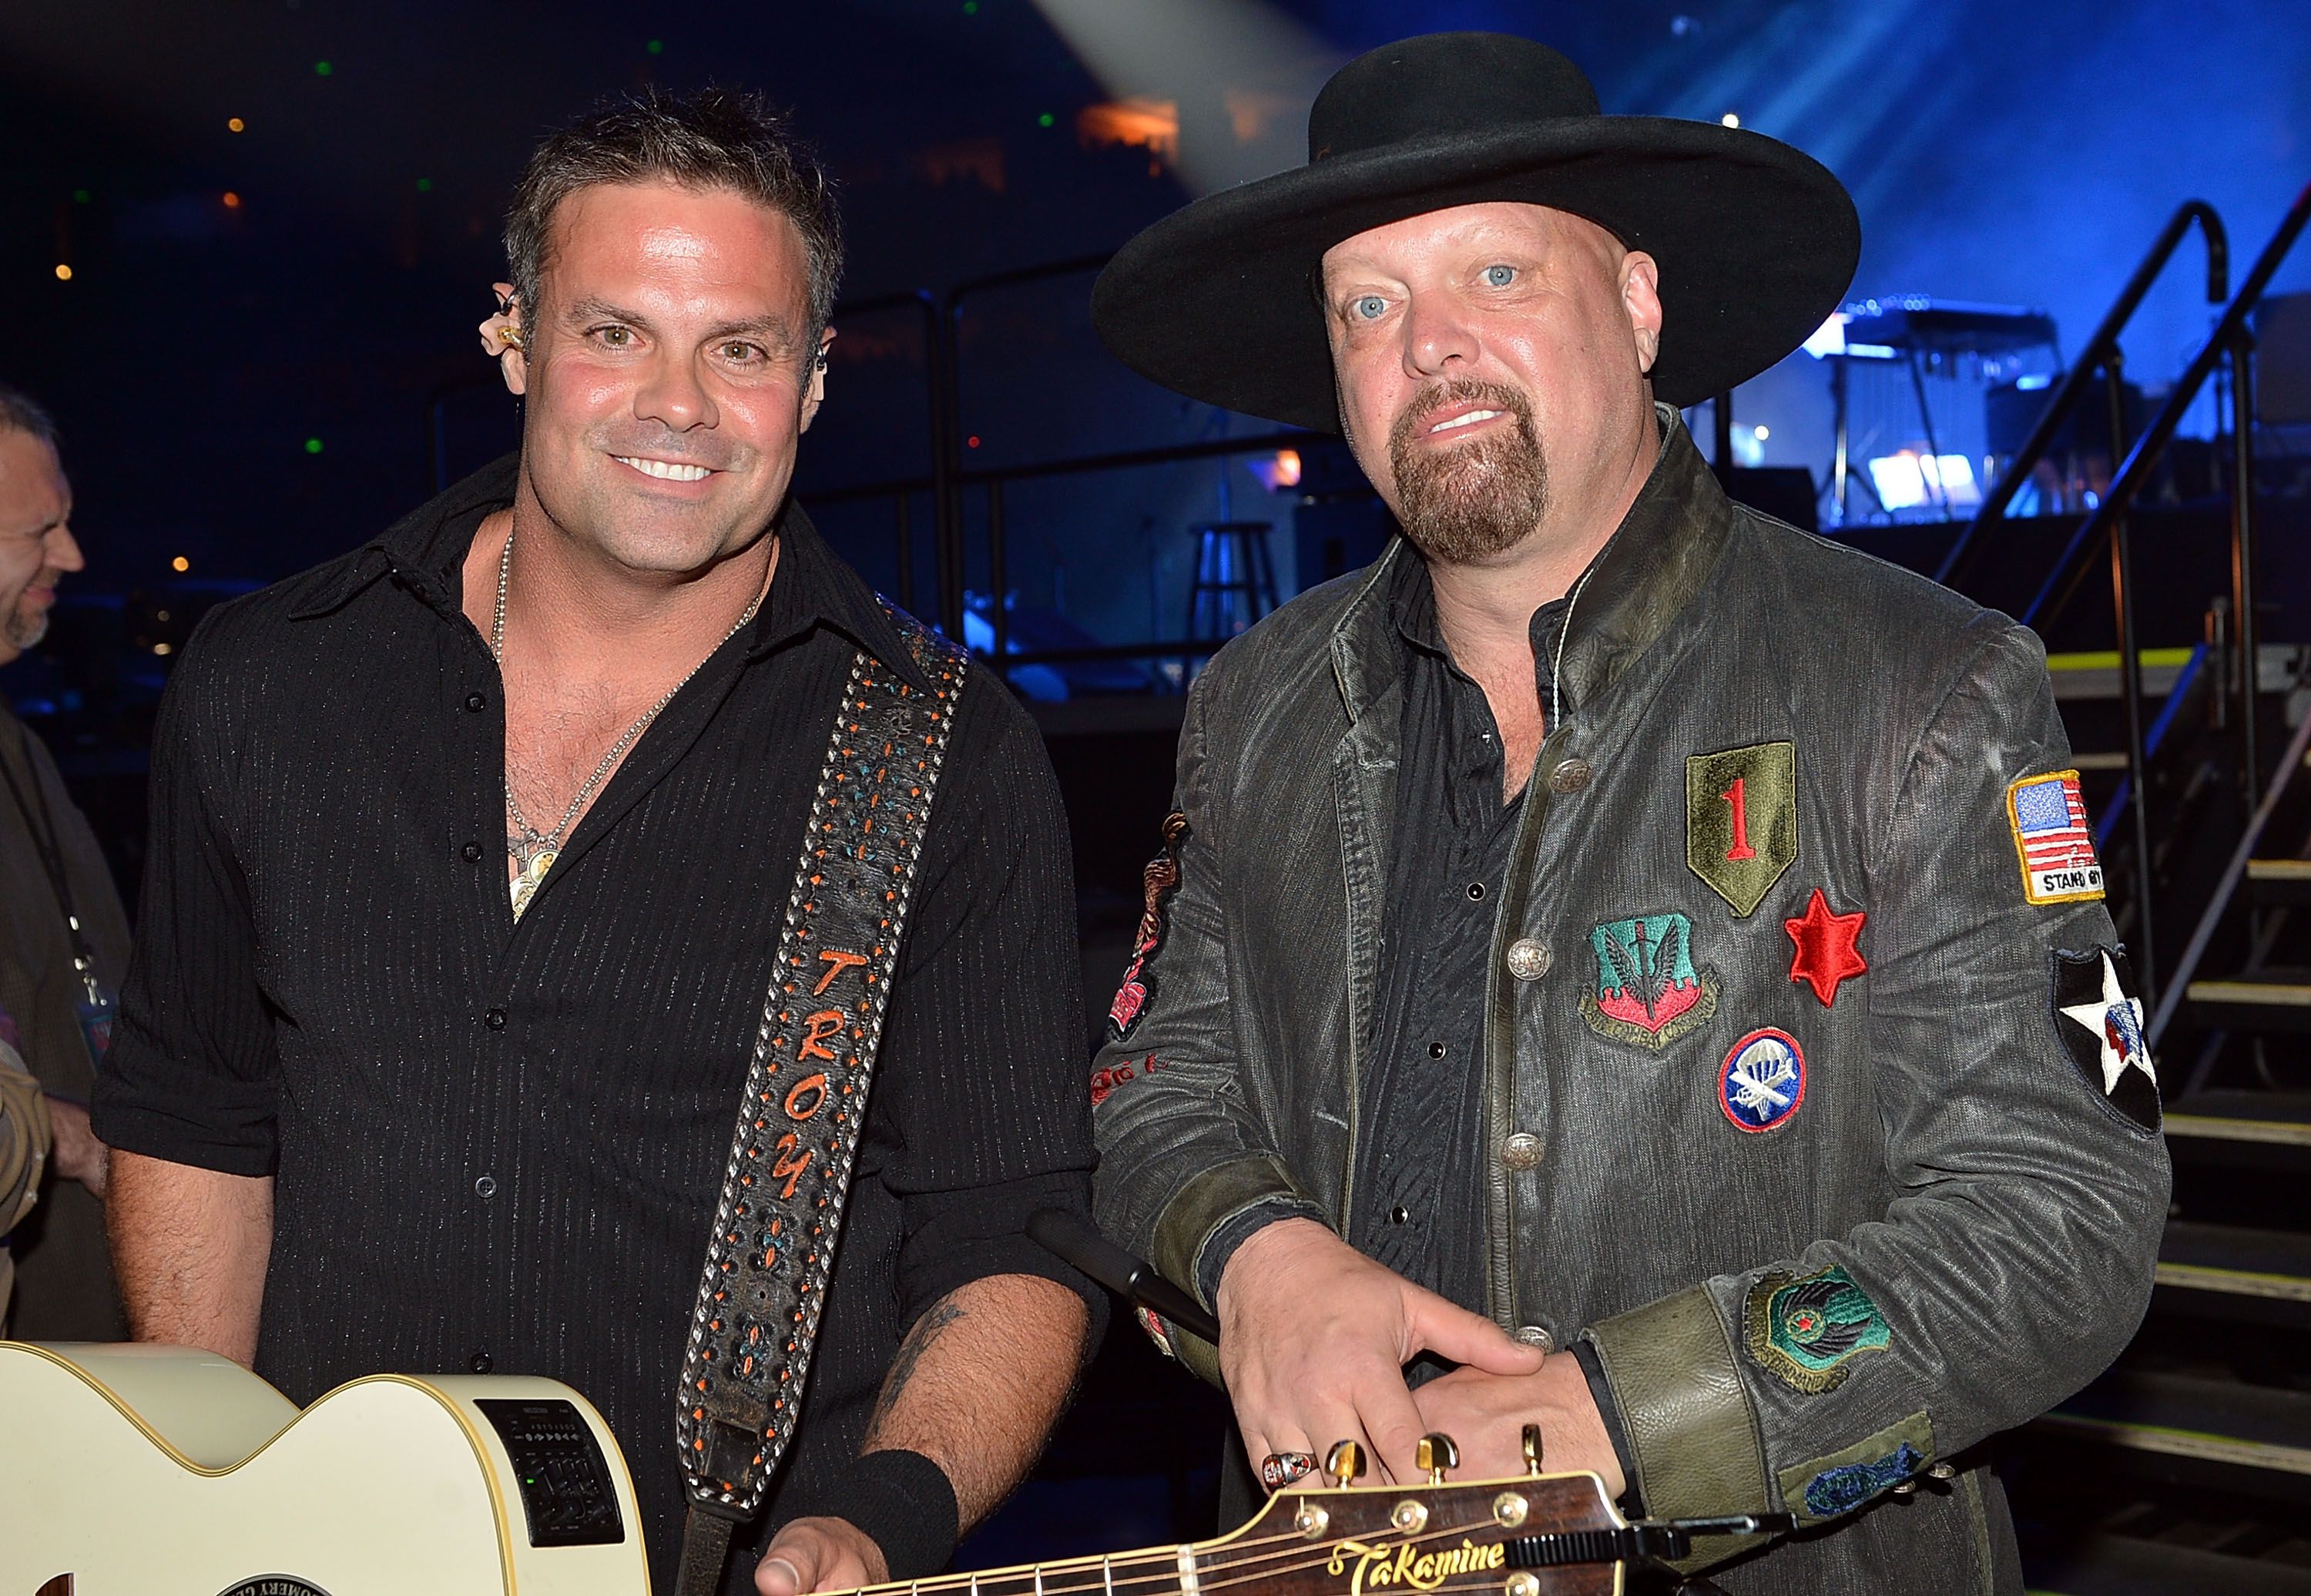 Montgomery Gentry Their Hits and History